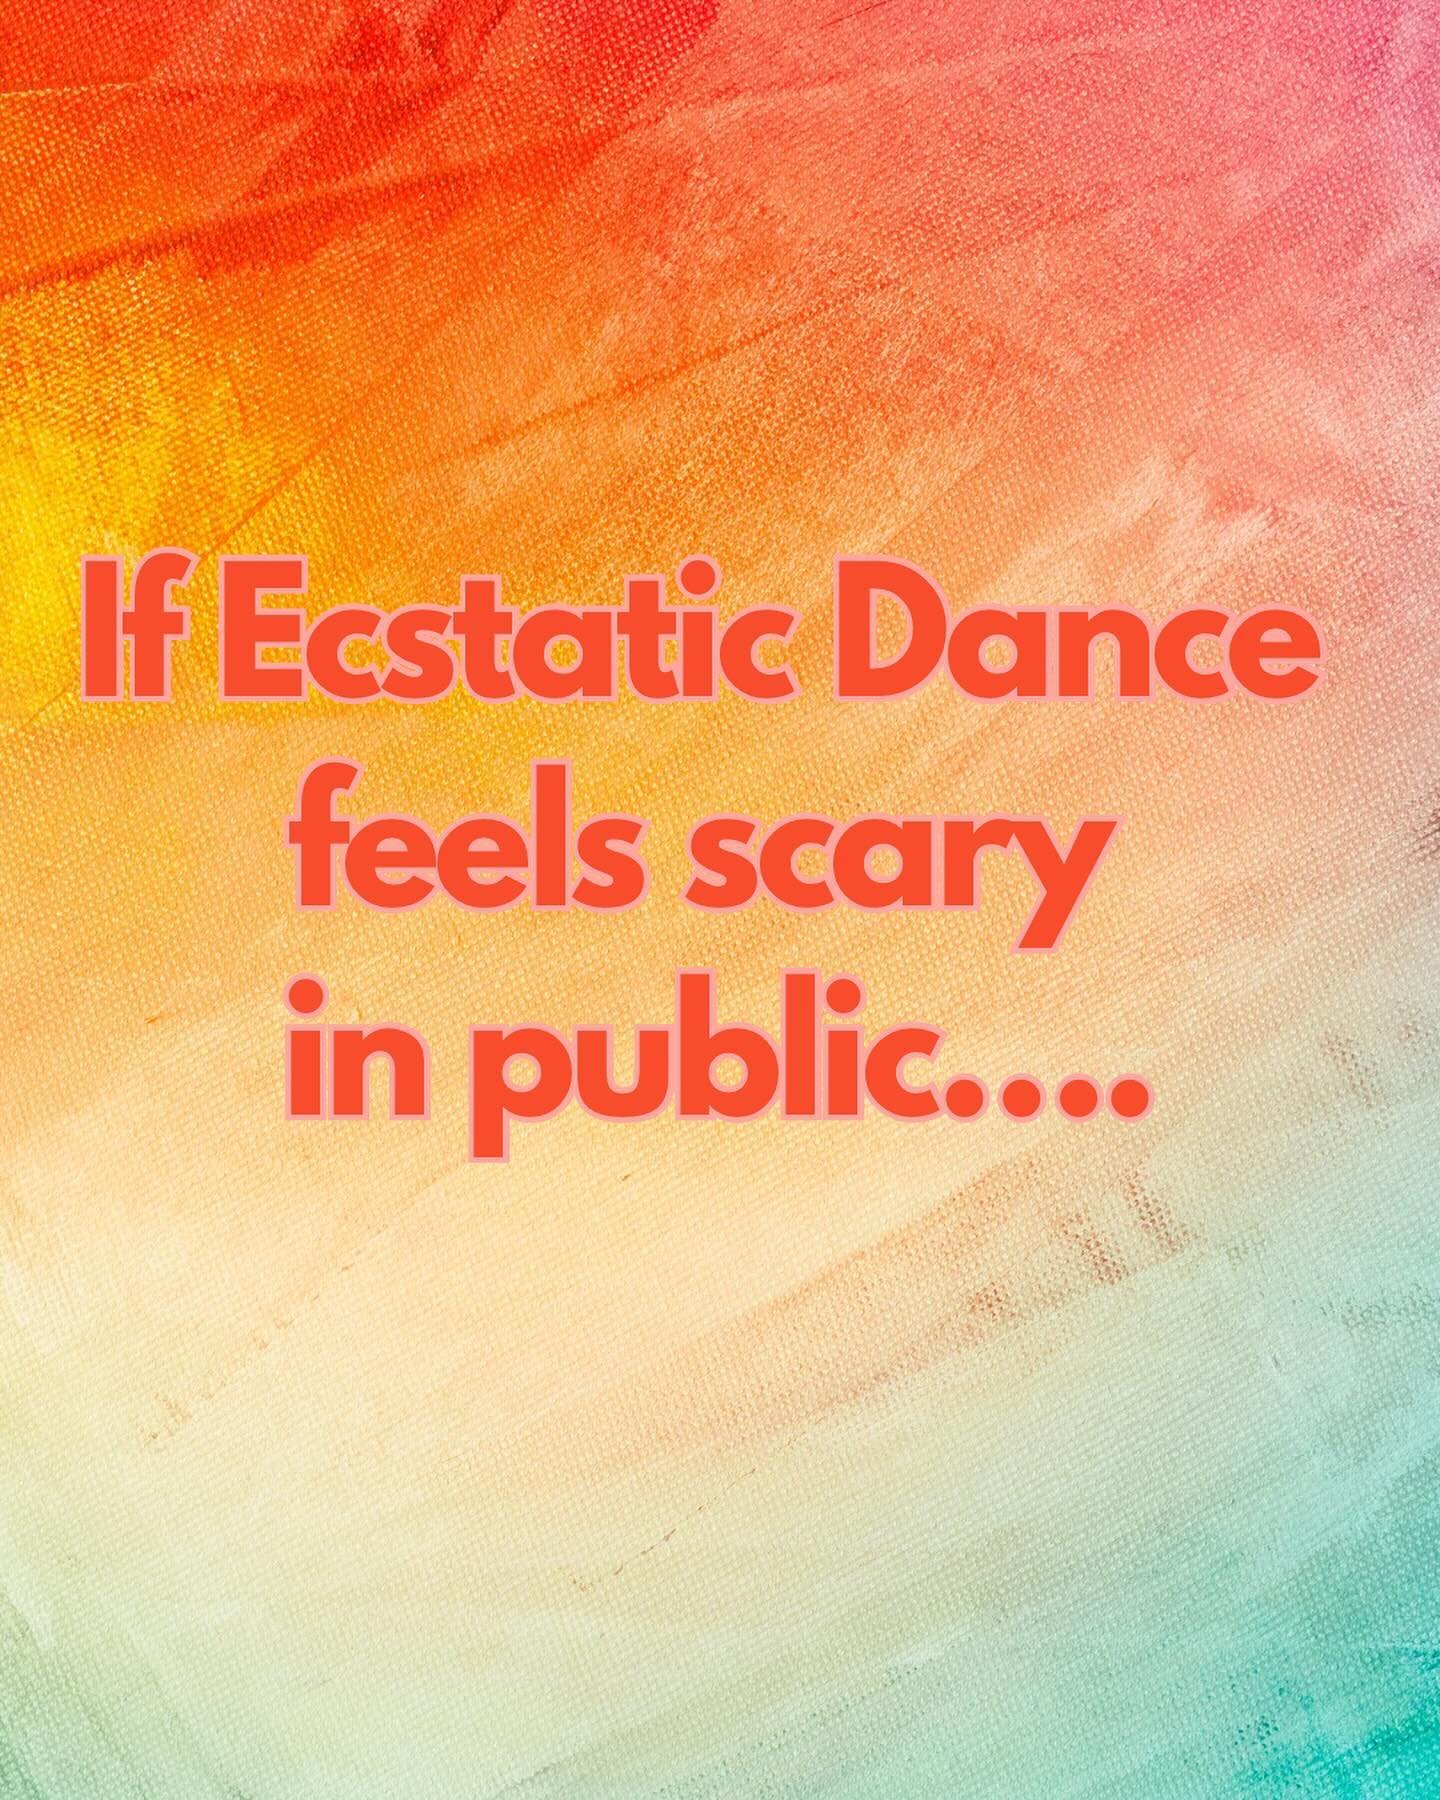 Ever felt your heart race at the thought of ecstatic dance? You&rsquo;re not alone! Many of us tremble at the idea of dancing without choreography, or surrounded by strangers. But here&rsquo;s the secret! It&rsquo;s not about being a good dancer. It&